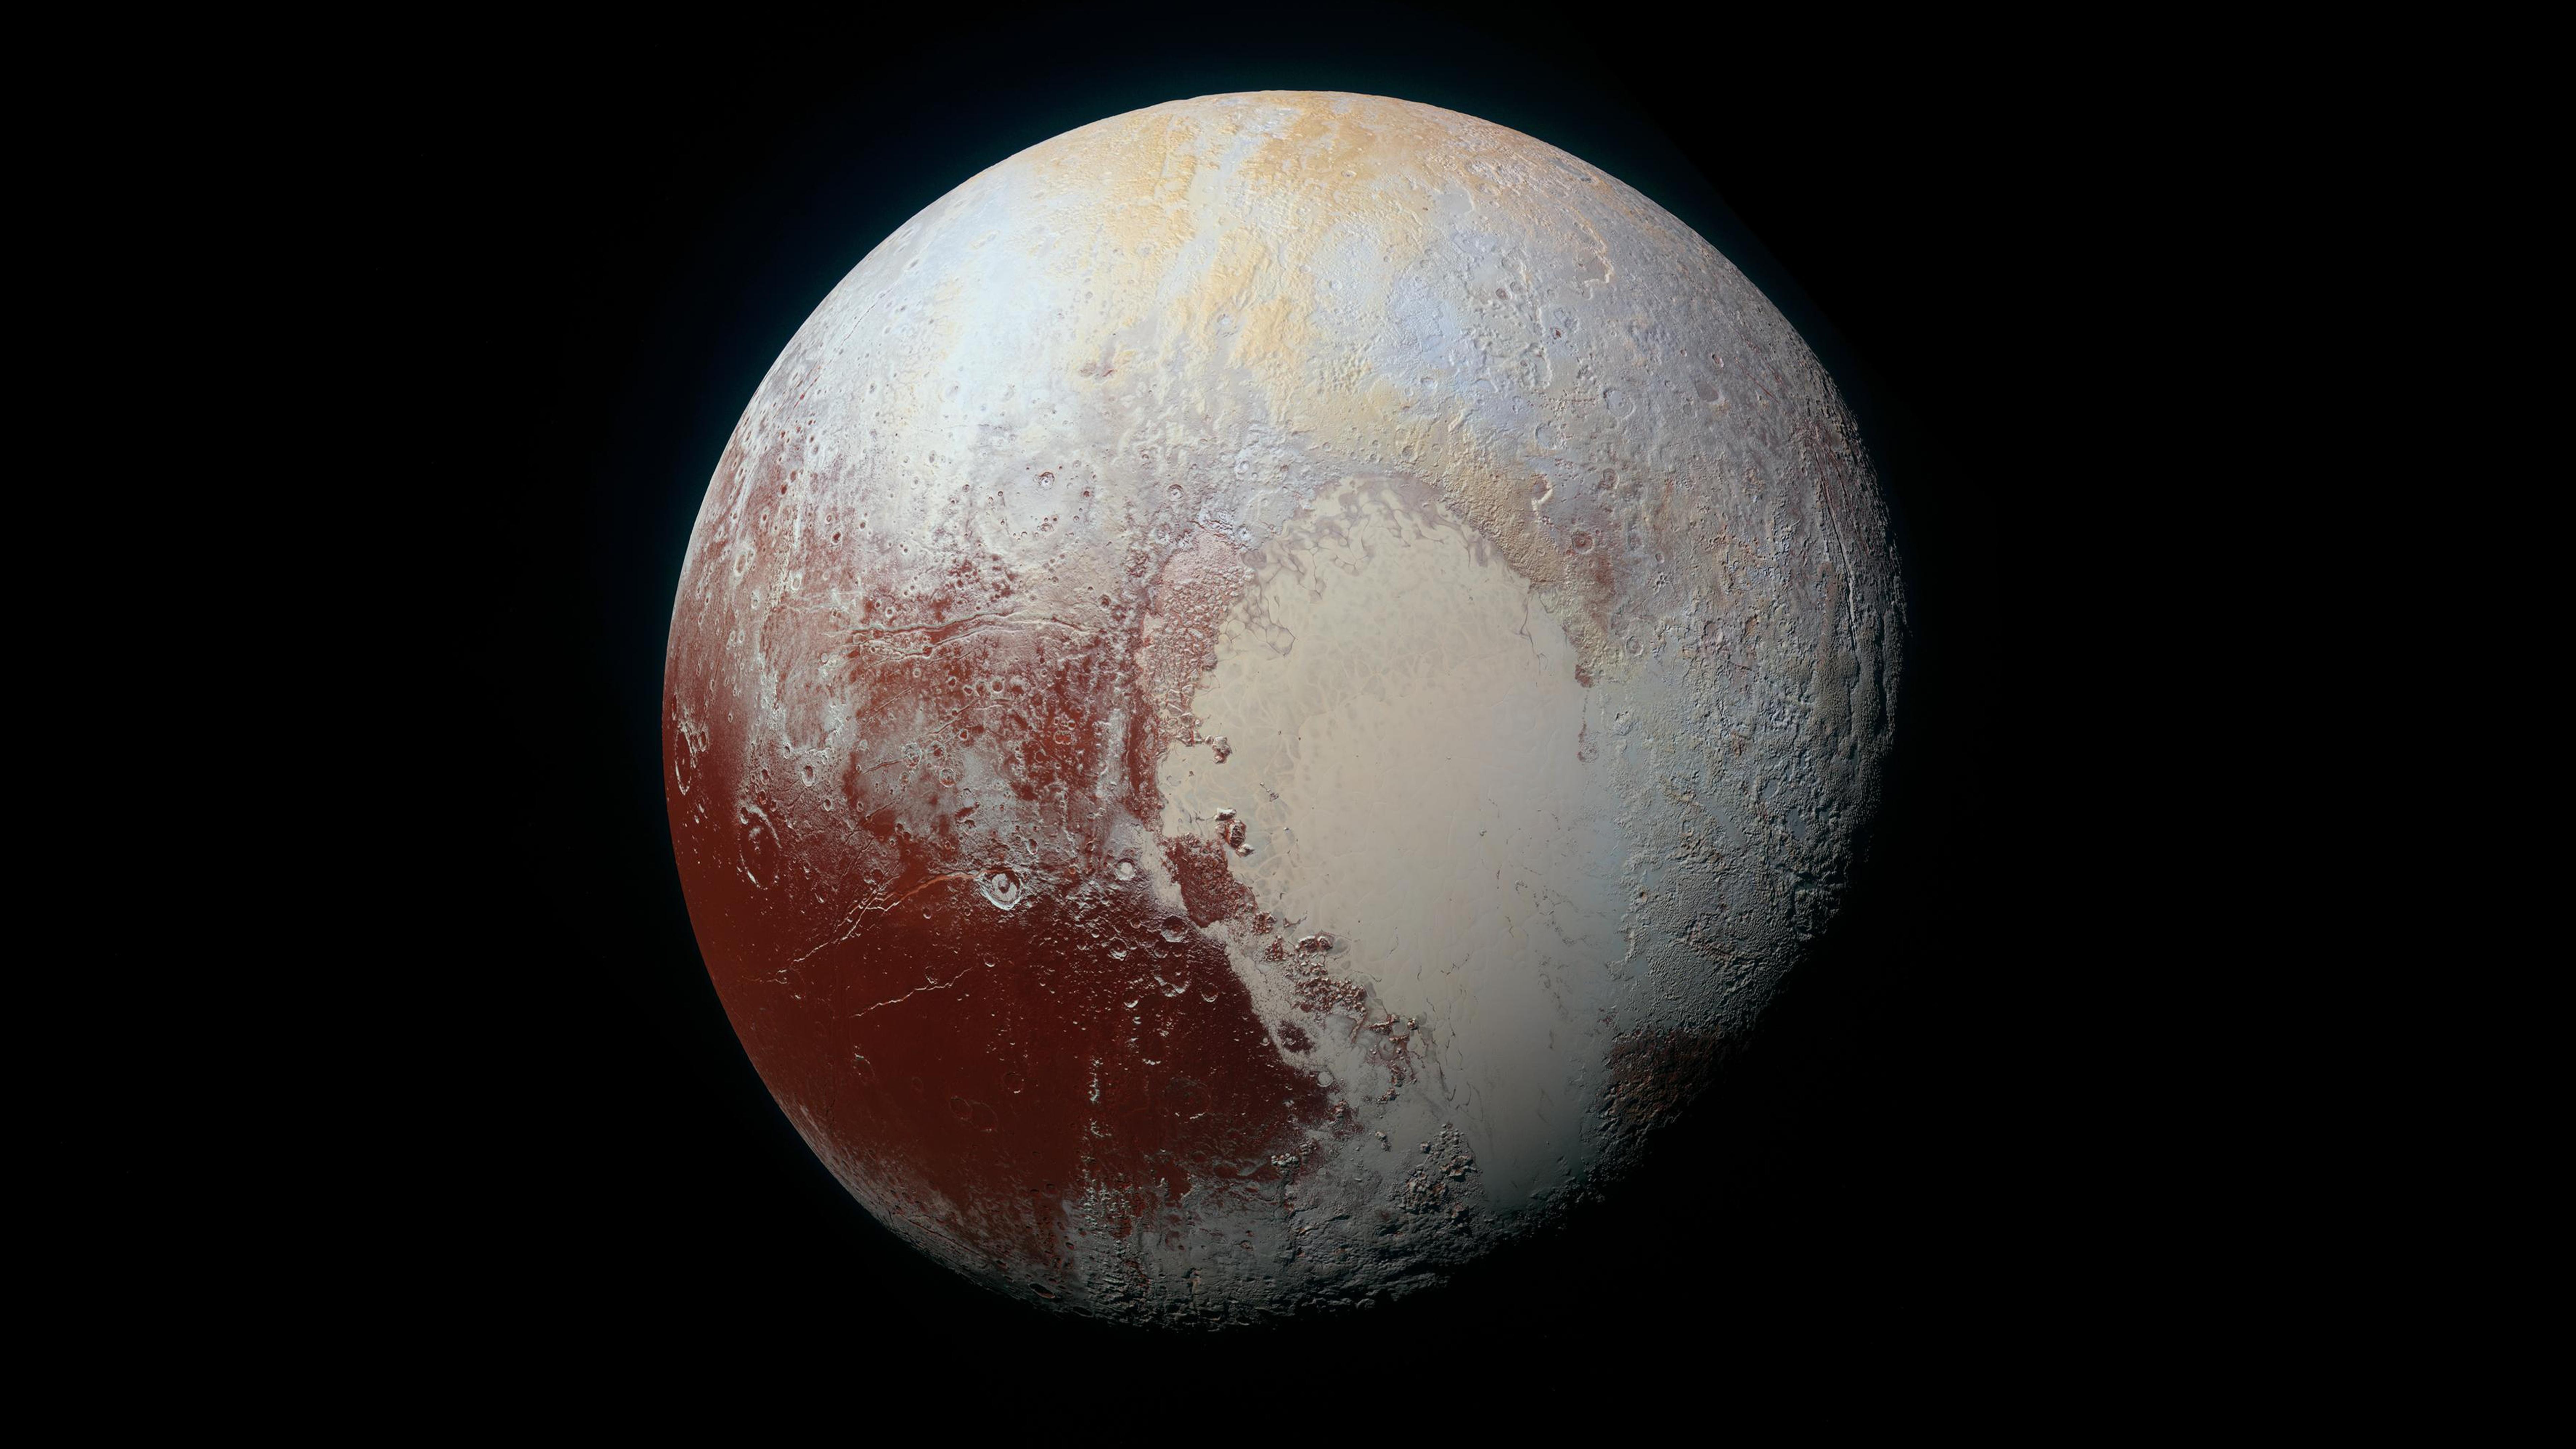 Pluto Photos Before And After - HD Wallpaper 